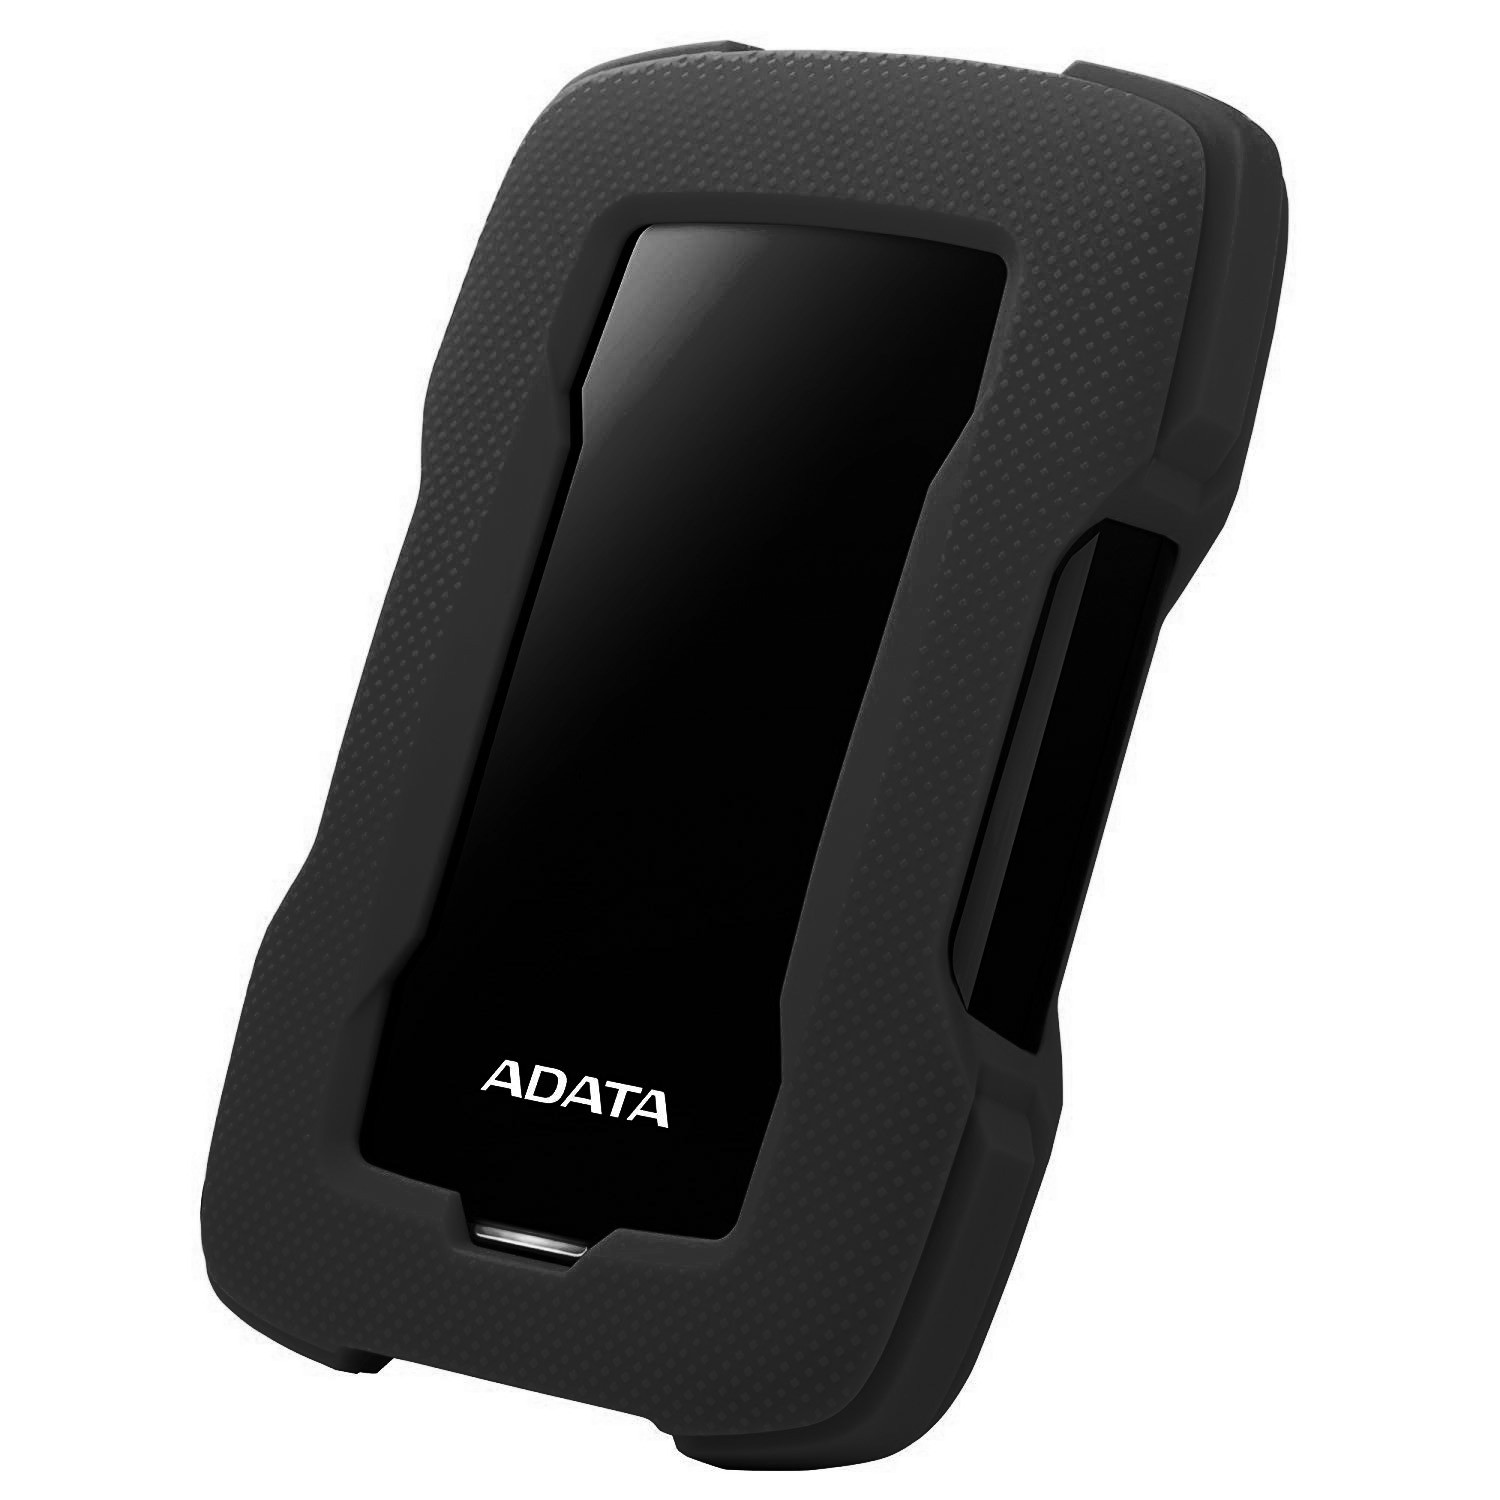 Adata Hd330 Series 2tb/2000gb Black+Black With Silicon Casing With Shock Absorption + G Shock Sensor Protectio